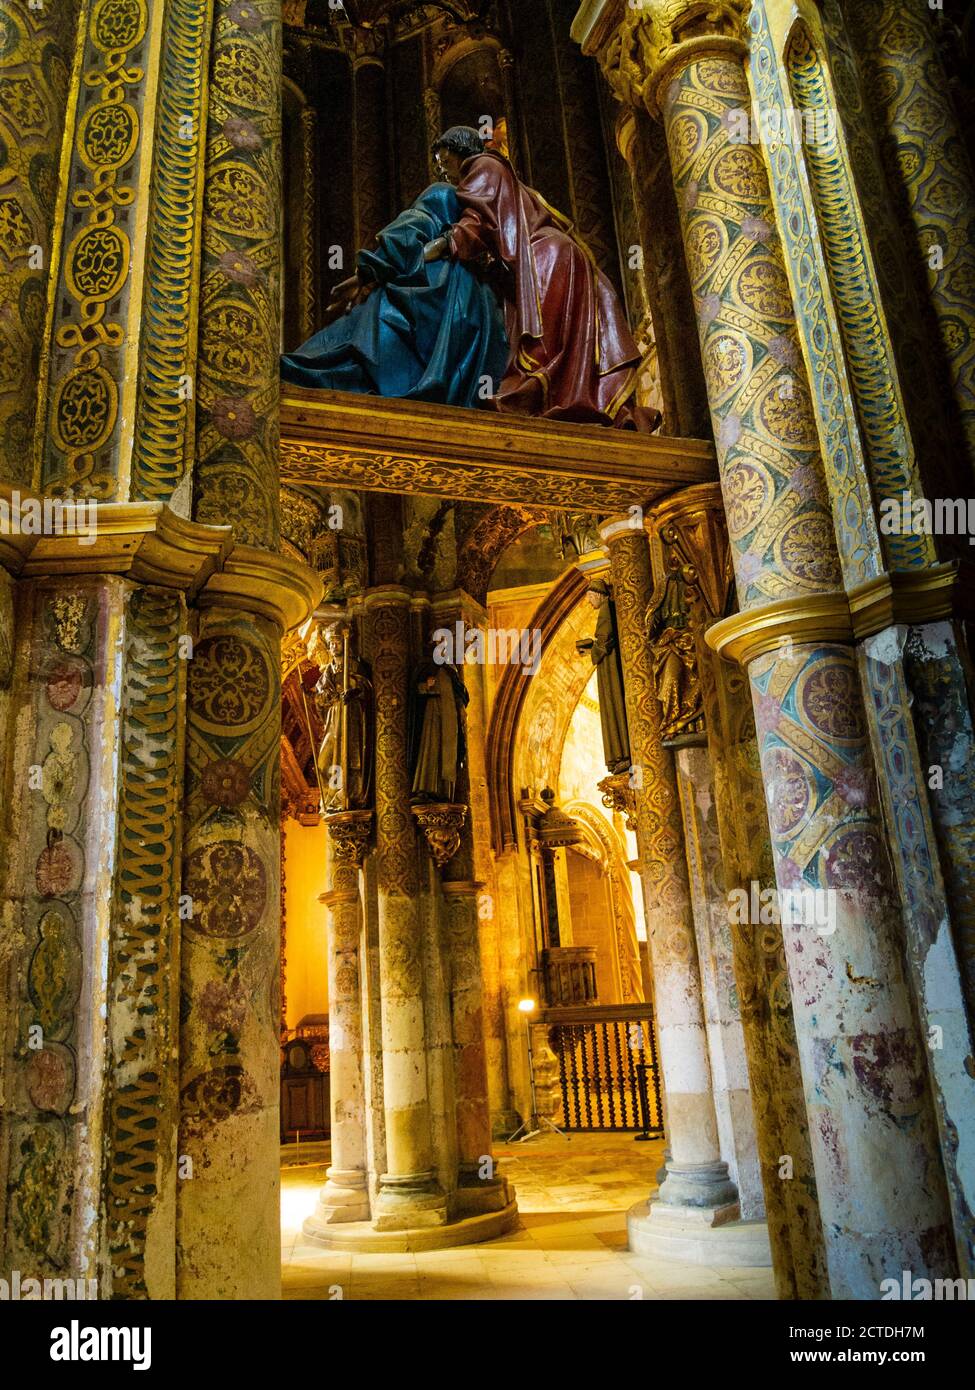 Interior detail of Round church, Convent of the Order of Christ (Convento de Cristo), Tomar, Portugal Stock Photo